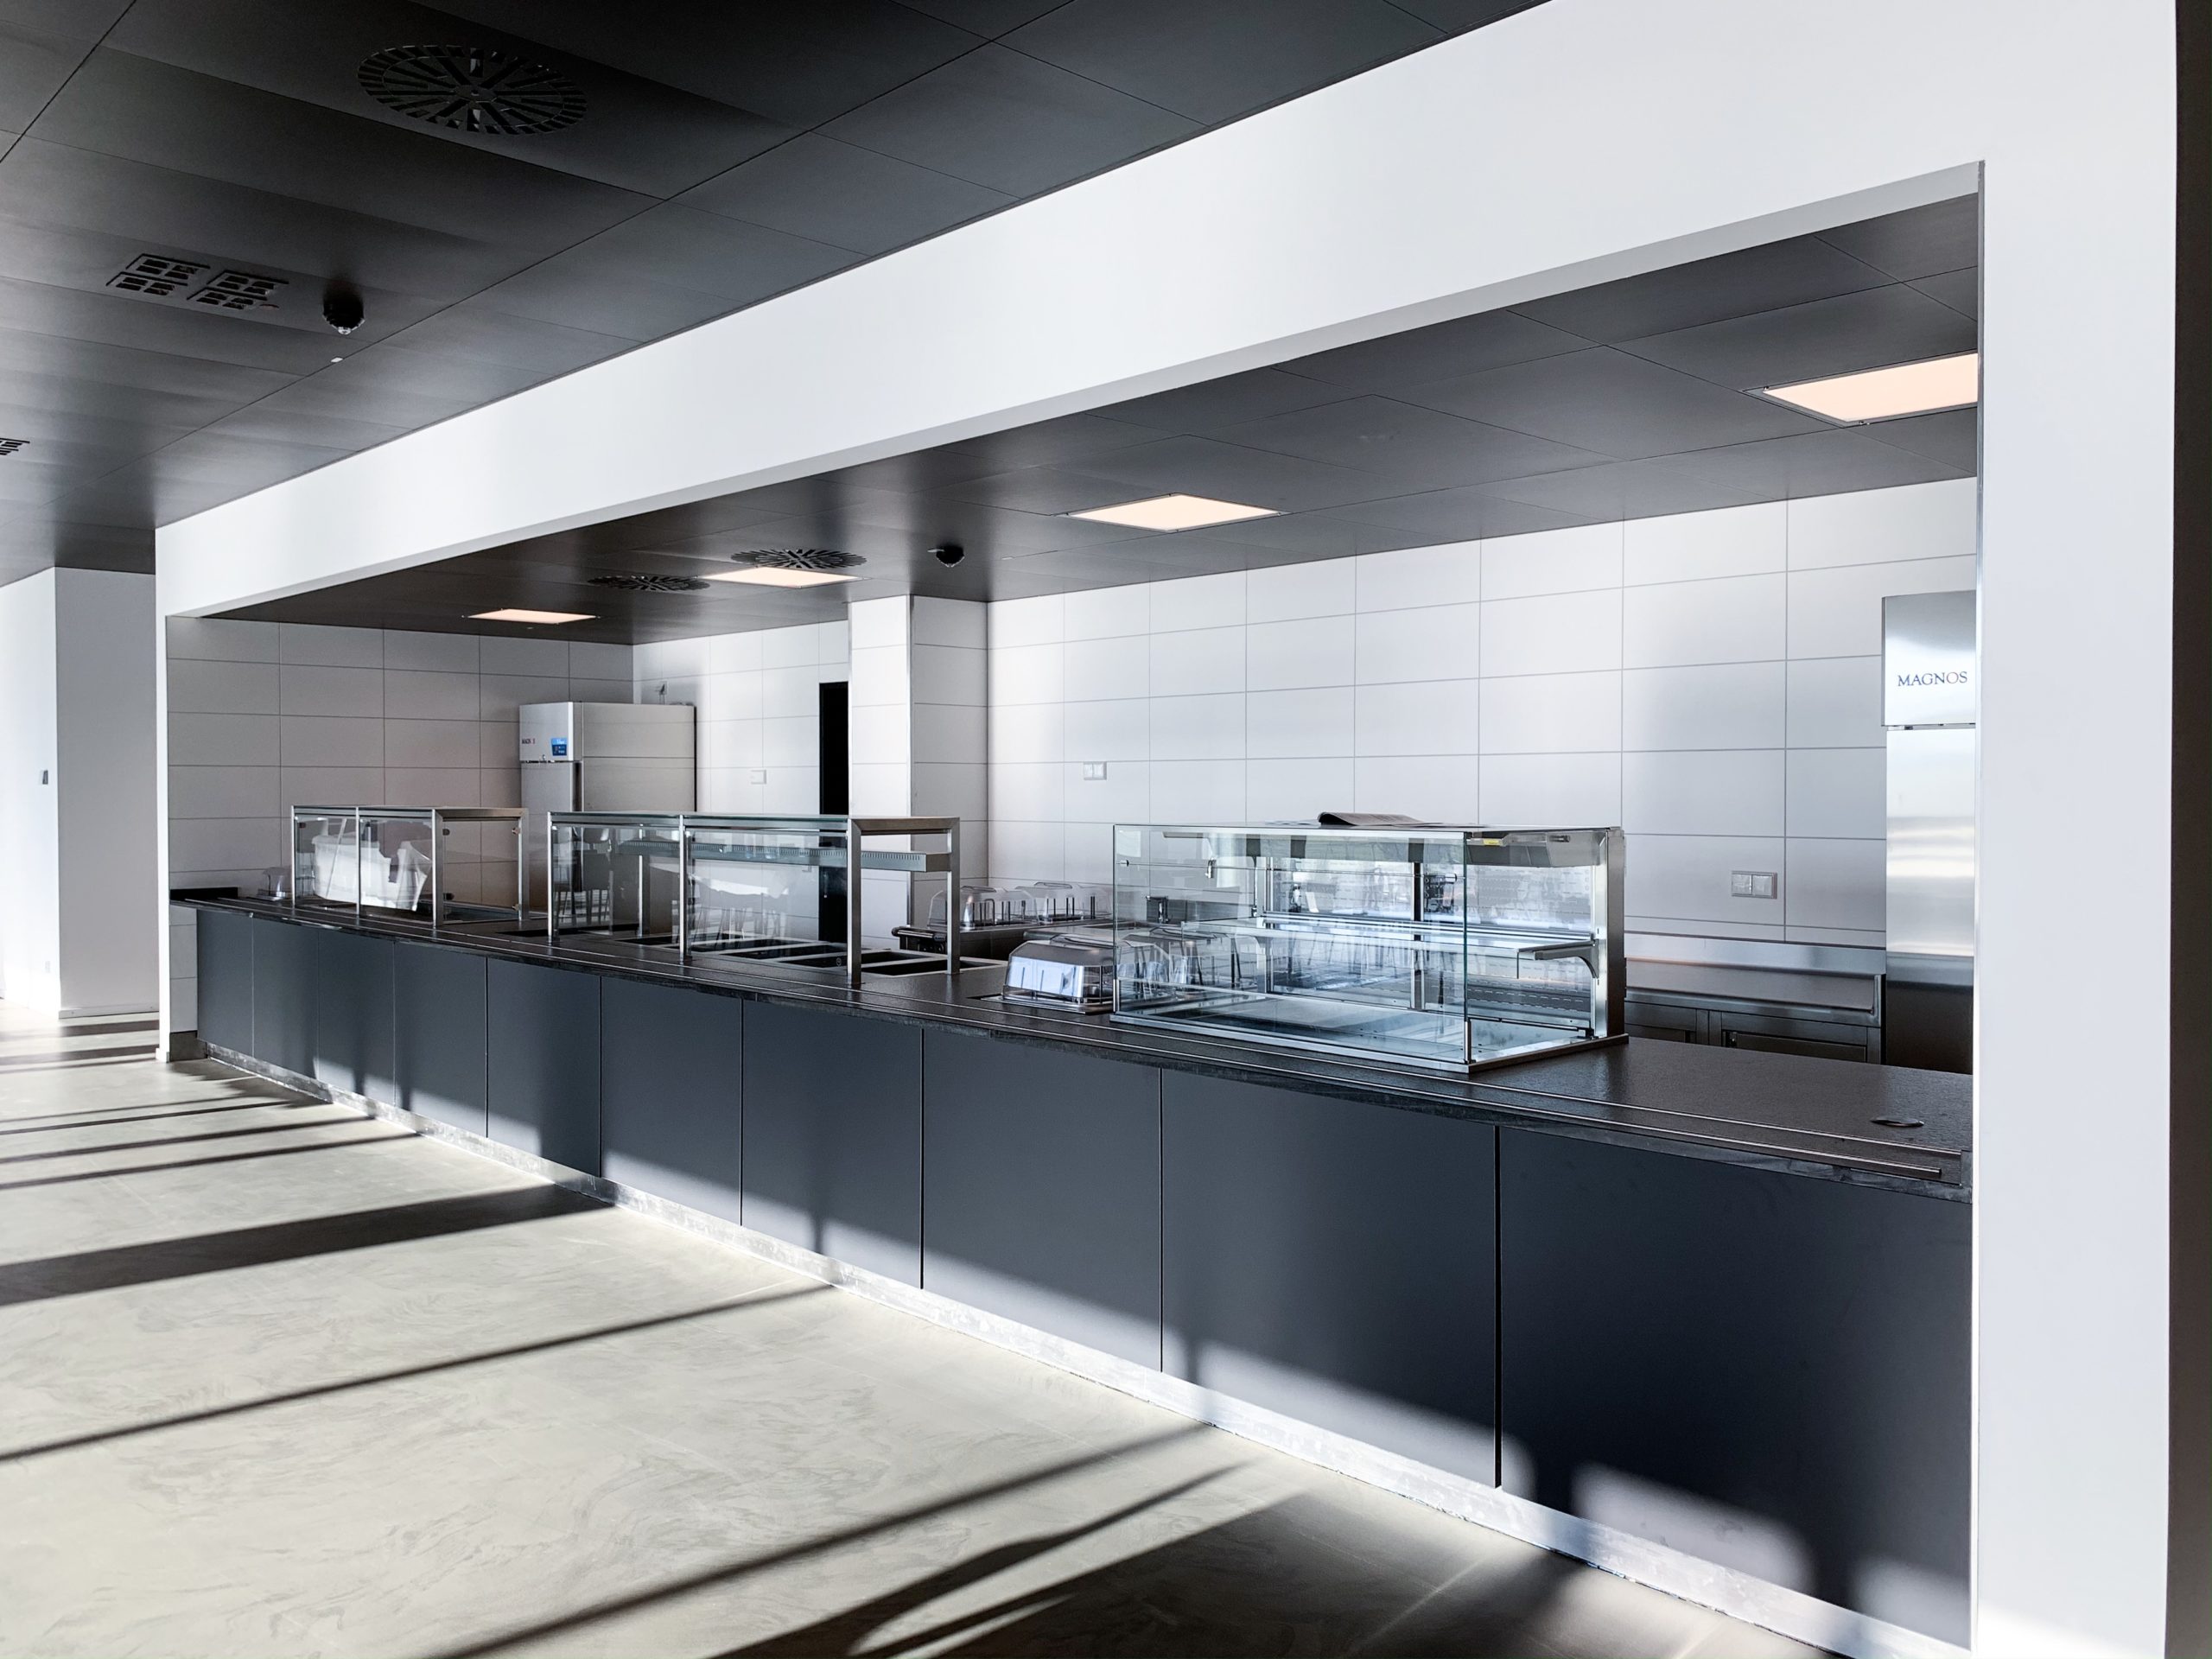 Building services kitchen/canteen Multivac